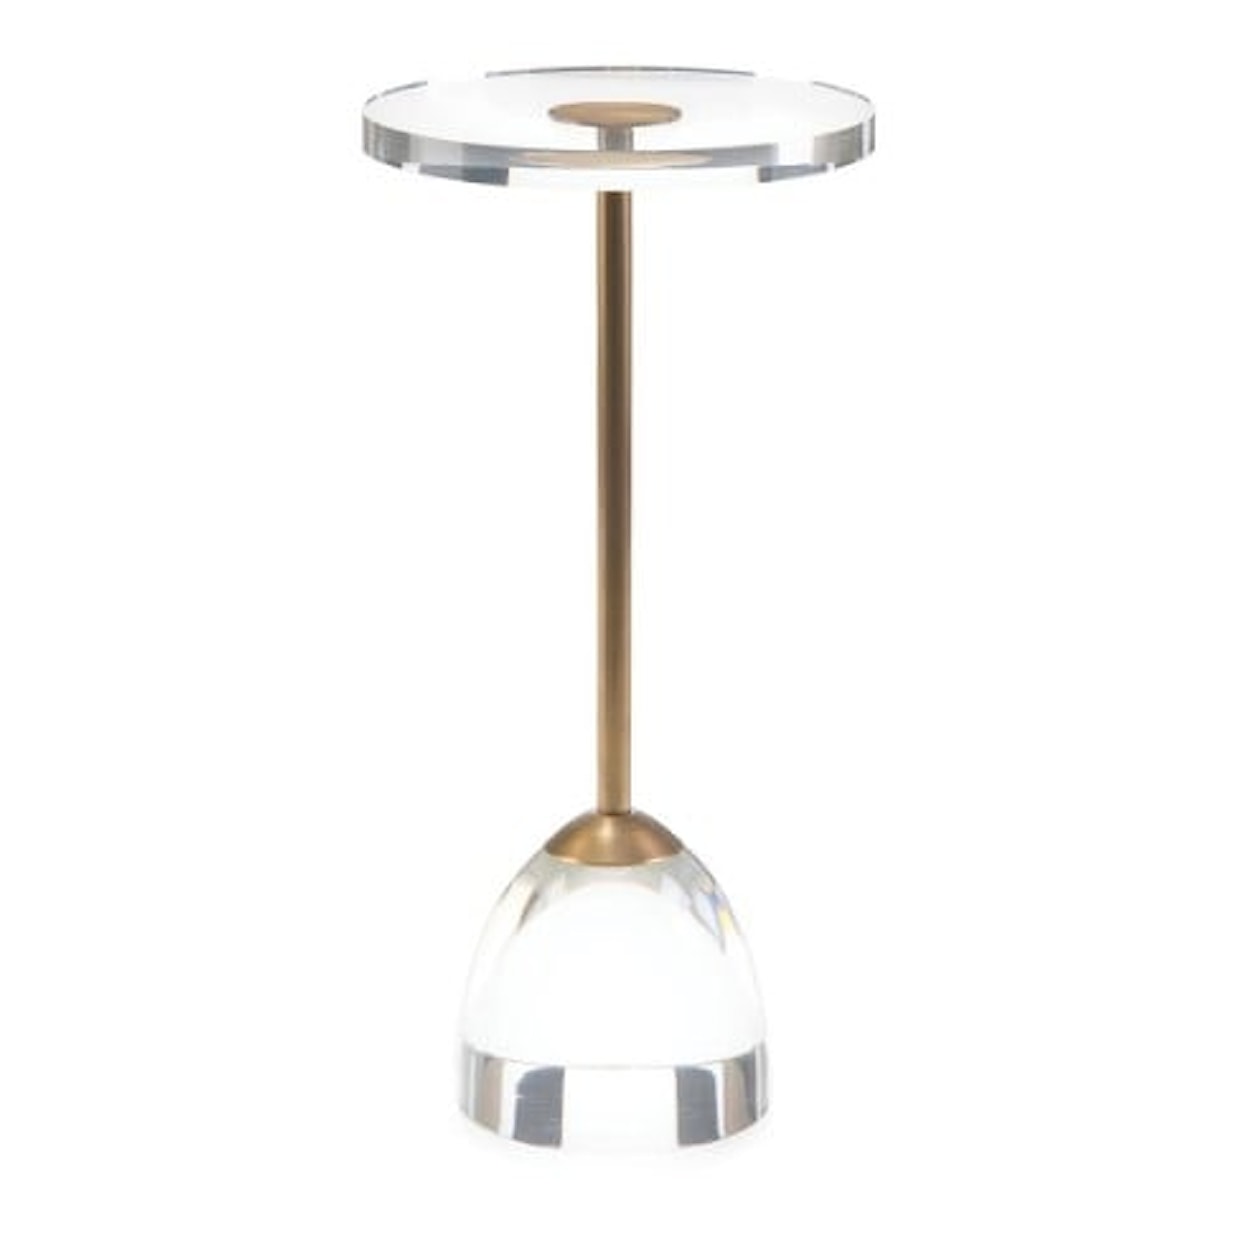 John-Richard End Tables BRASS AND ACRYLIC MARTINI SIDE TABLE